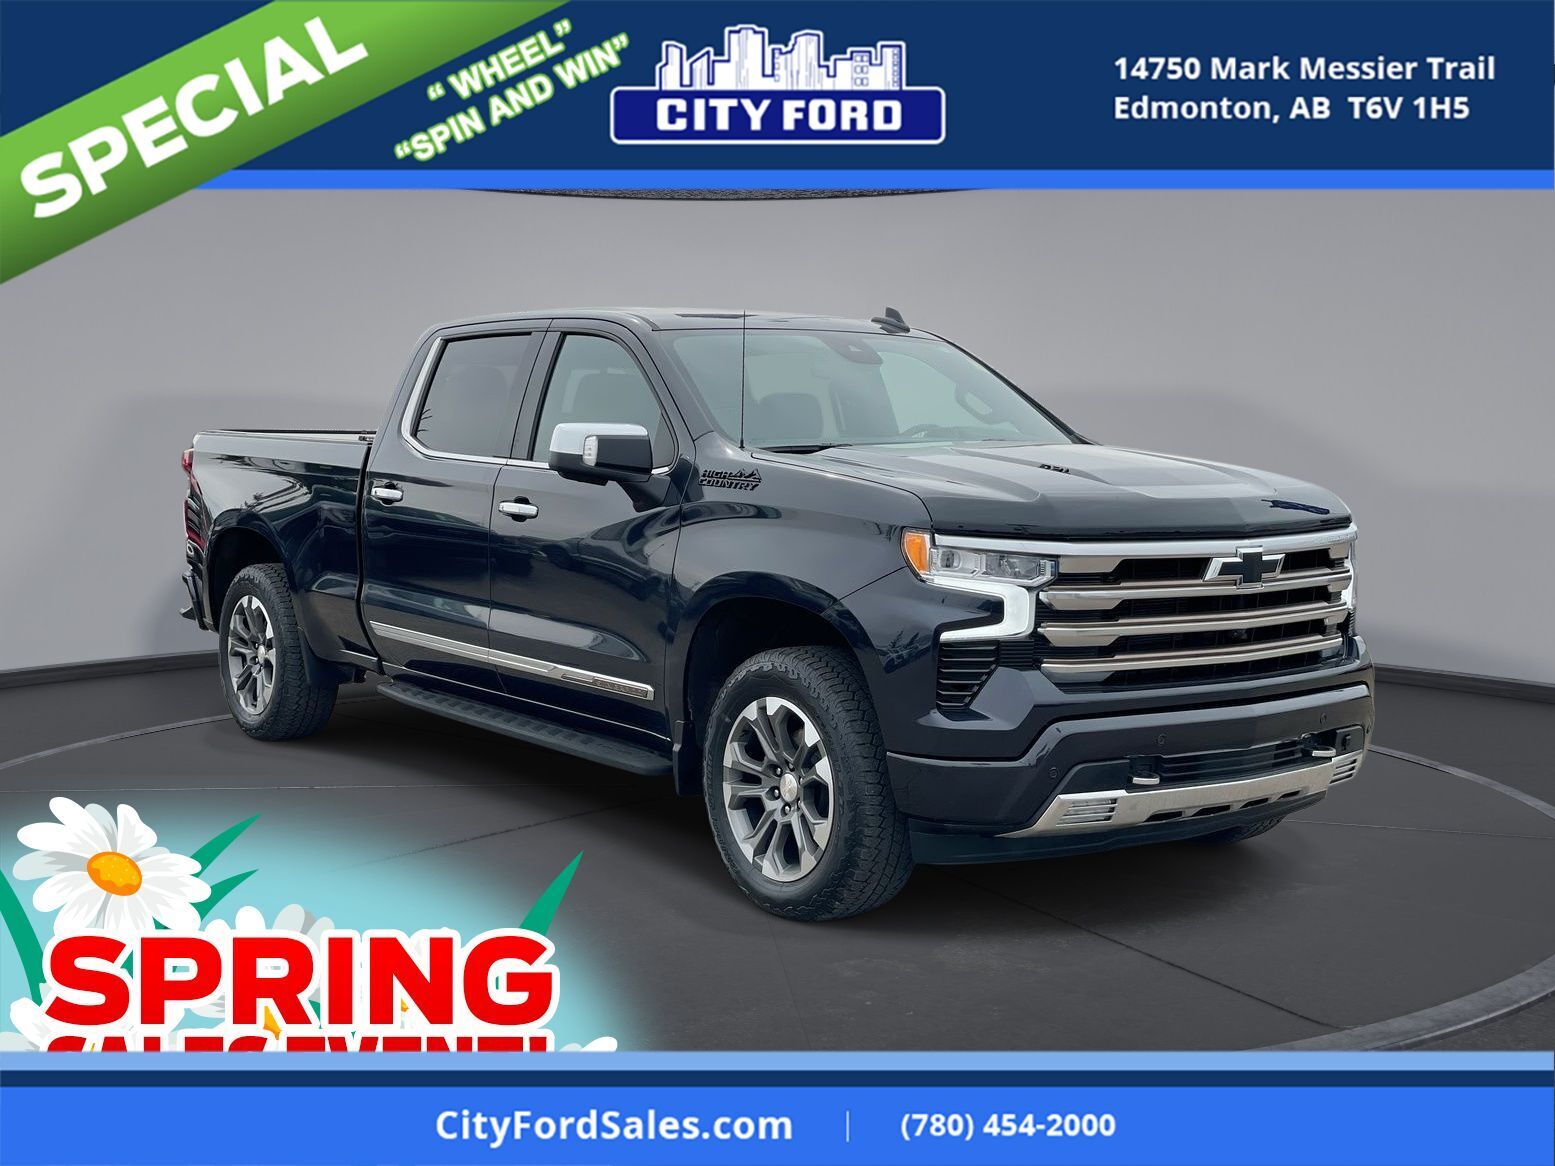 2022 Chevrolet Silverado 1500 High Country 4x4 Crew Cab 147'' | LOADED LOADED !!